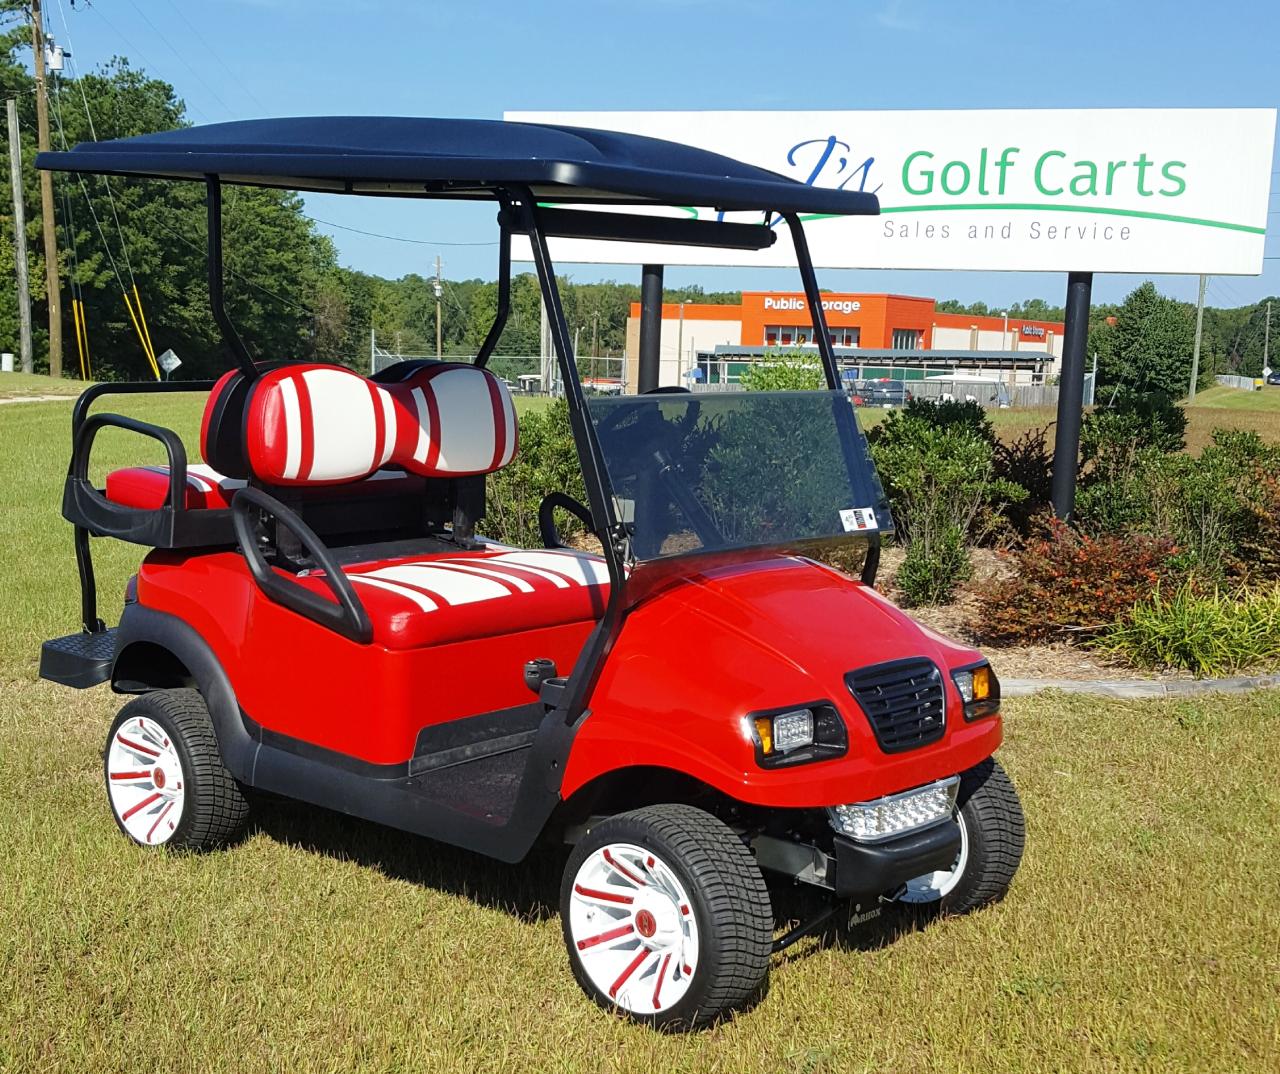 Used Golf Carts for Sale by Owner in Vernon, Louisiana: Your Ride to Adventure